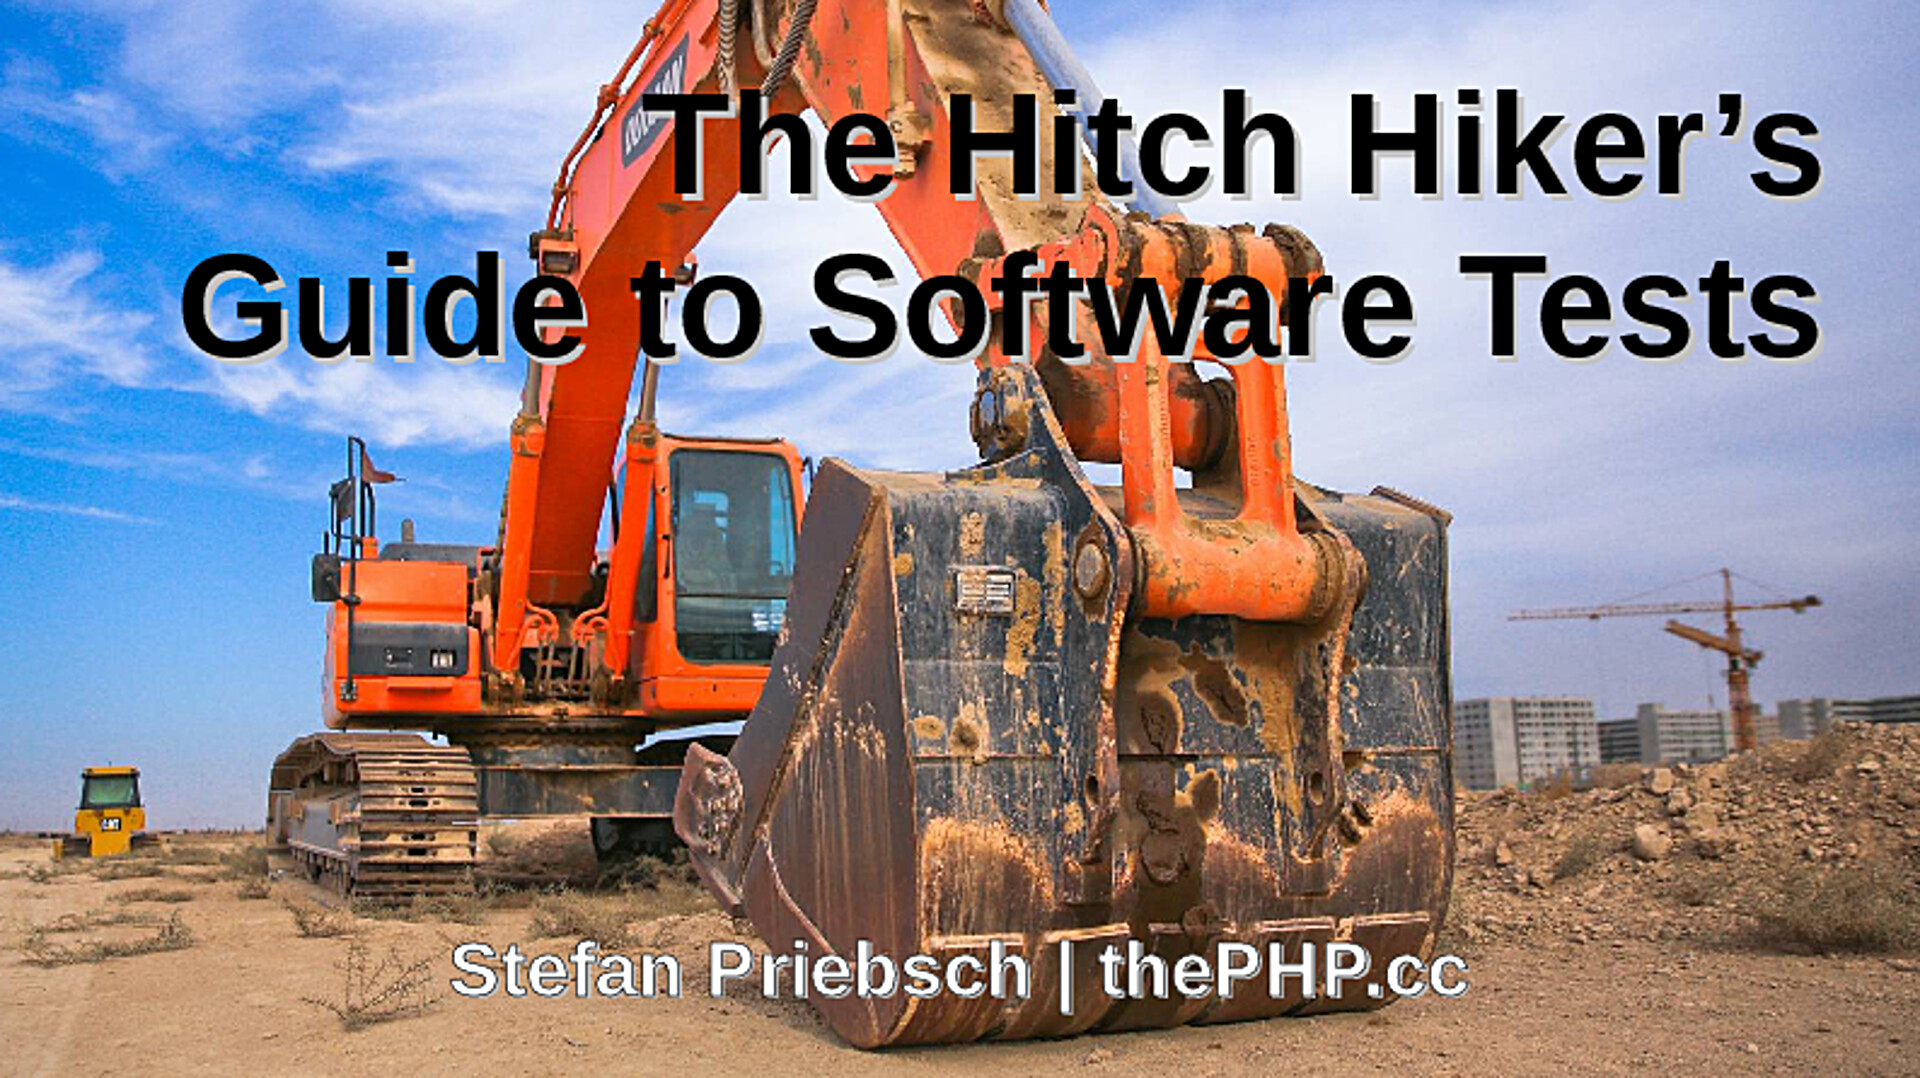 The Hitchhiker's Guide to Software Tests